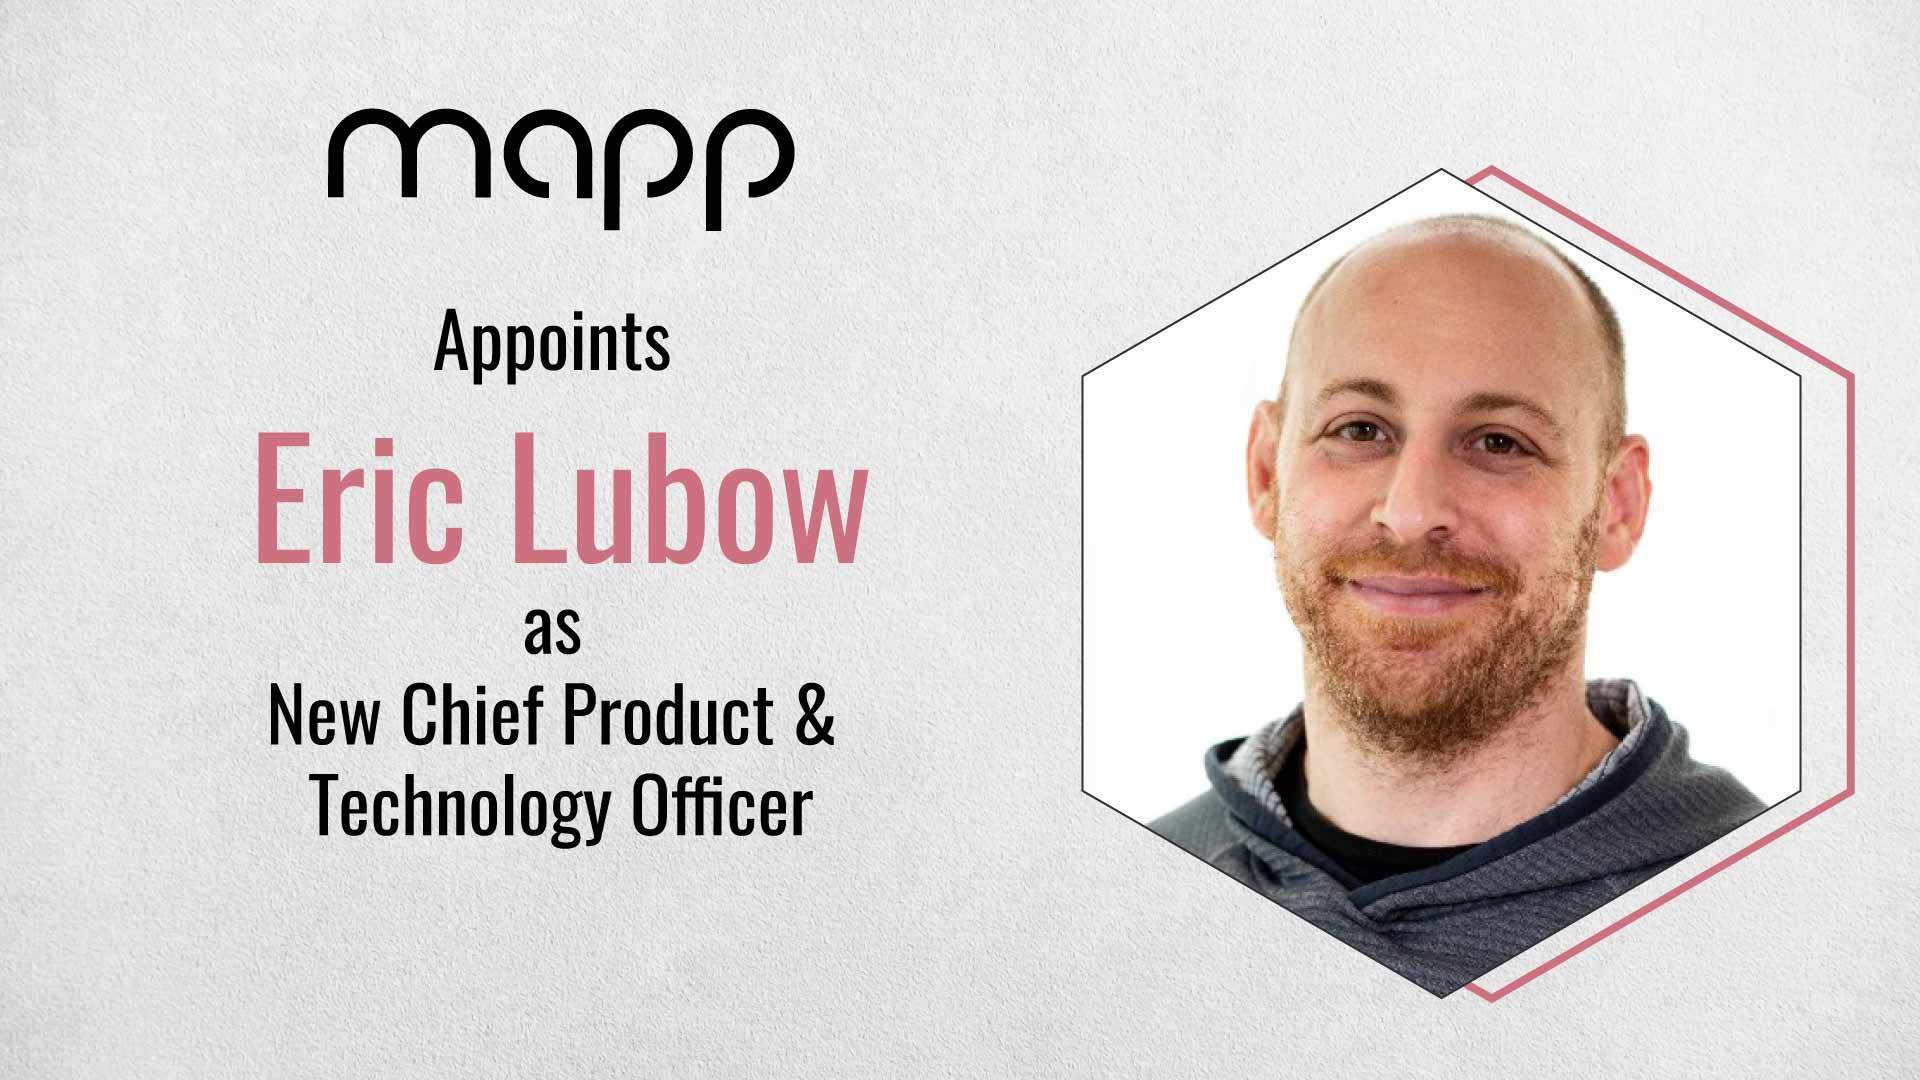 Mapp Announces Appointment of Eric Lubow as New Chief Product & Technology Officer